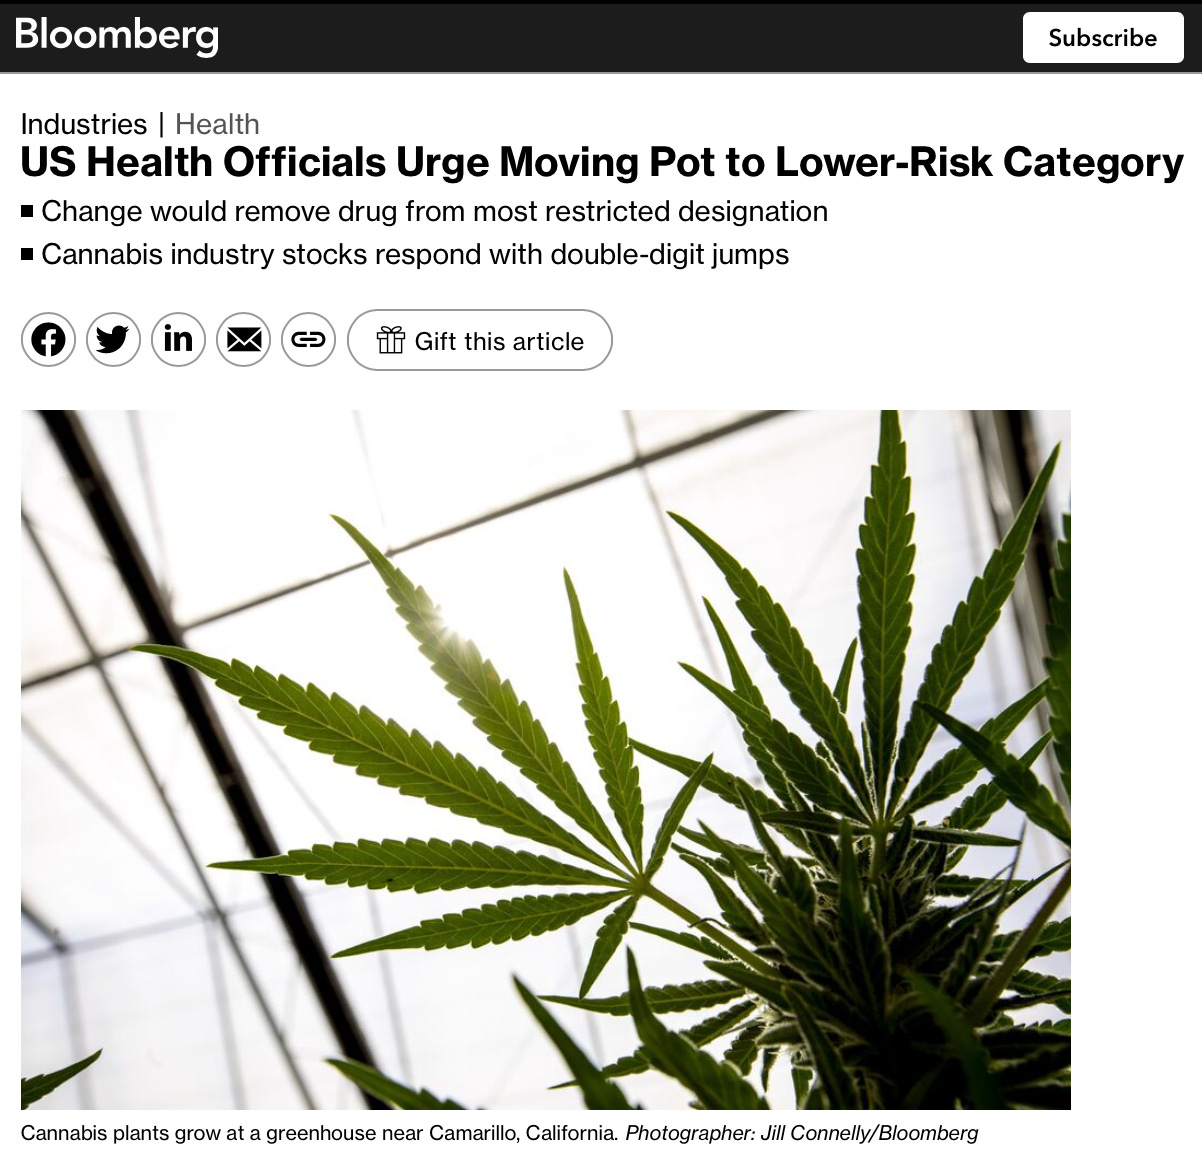 Screenshot of Bloomberg news article called "US Health Officials Urge Moving Pot to Lower-Risk Category"